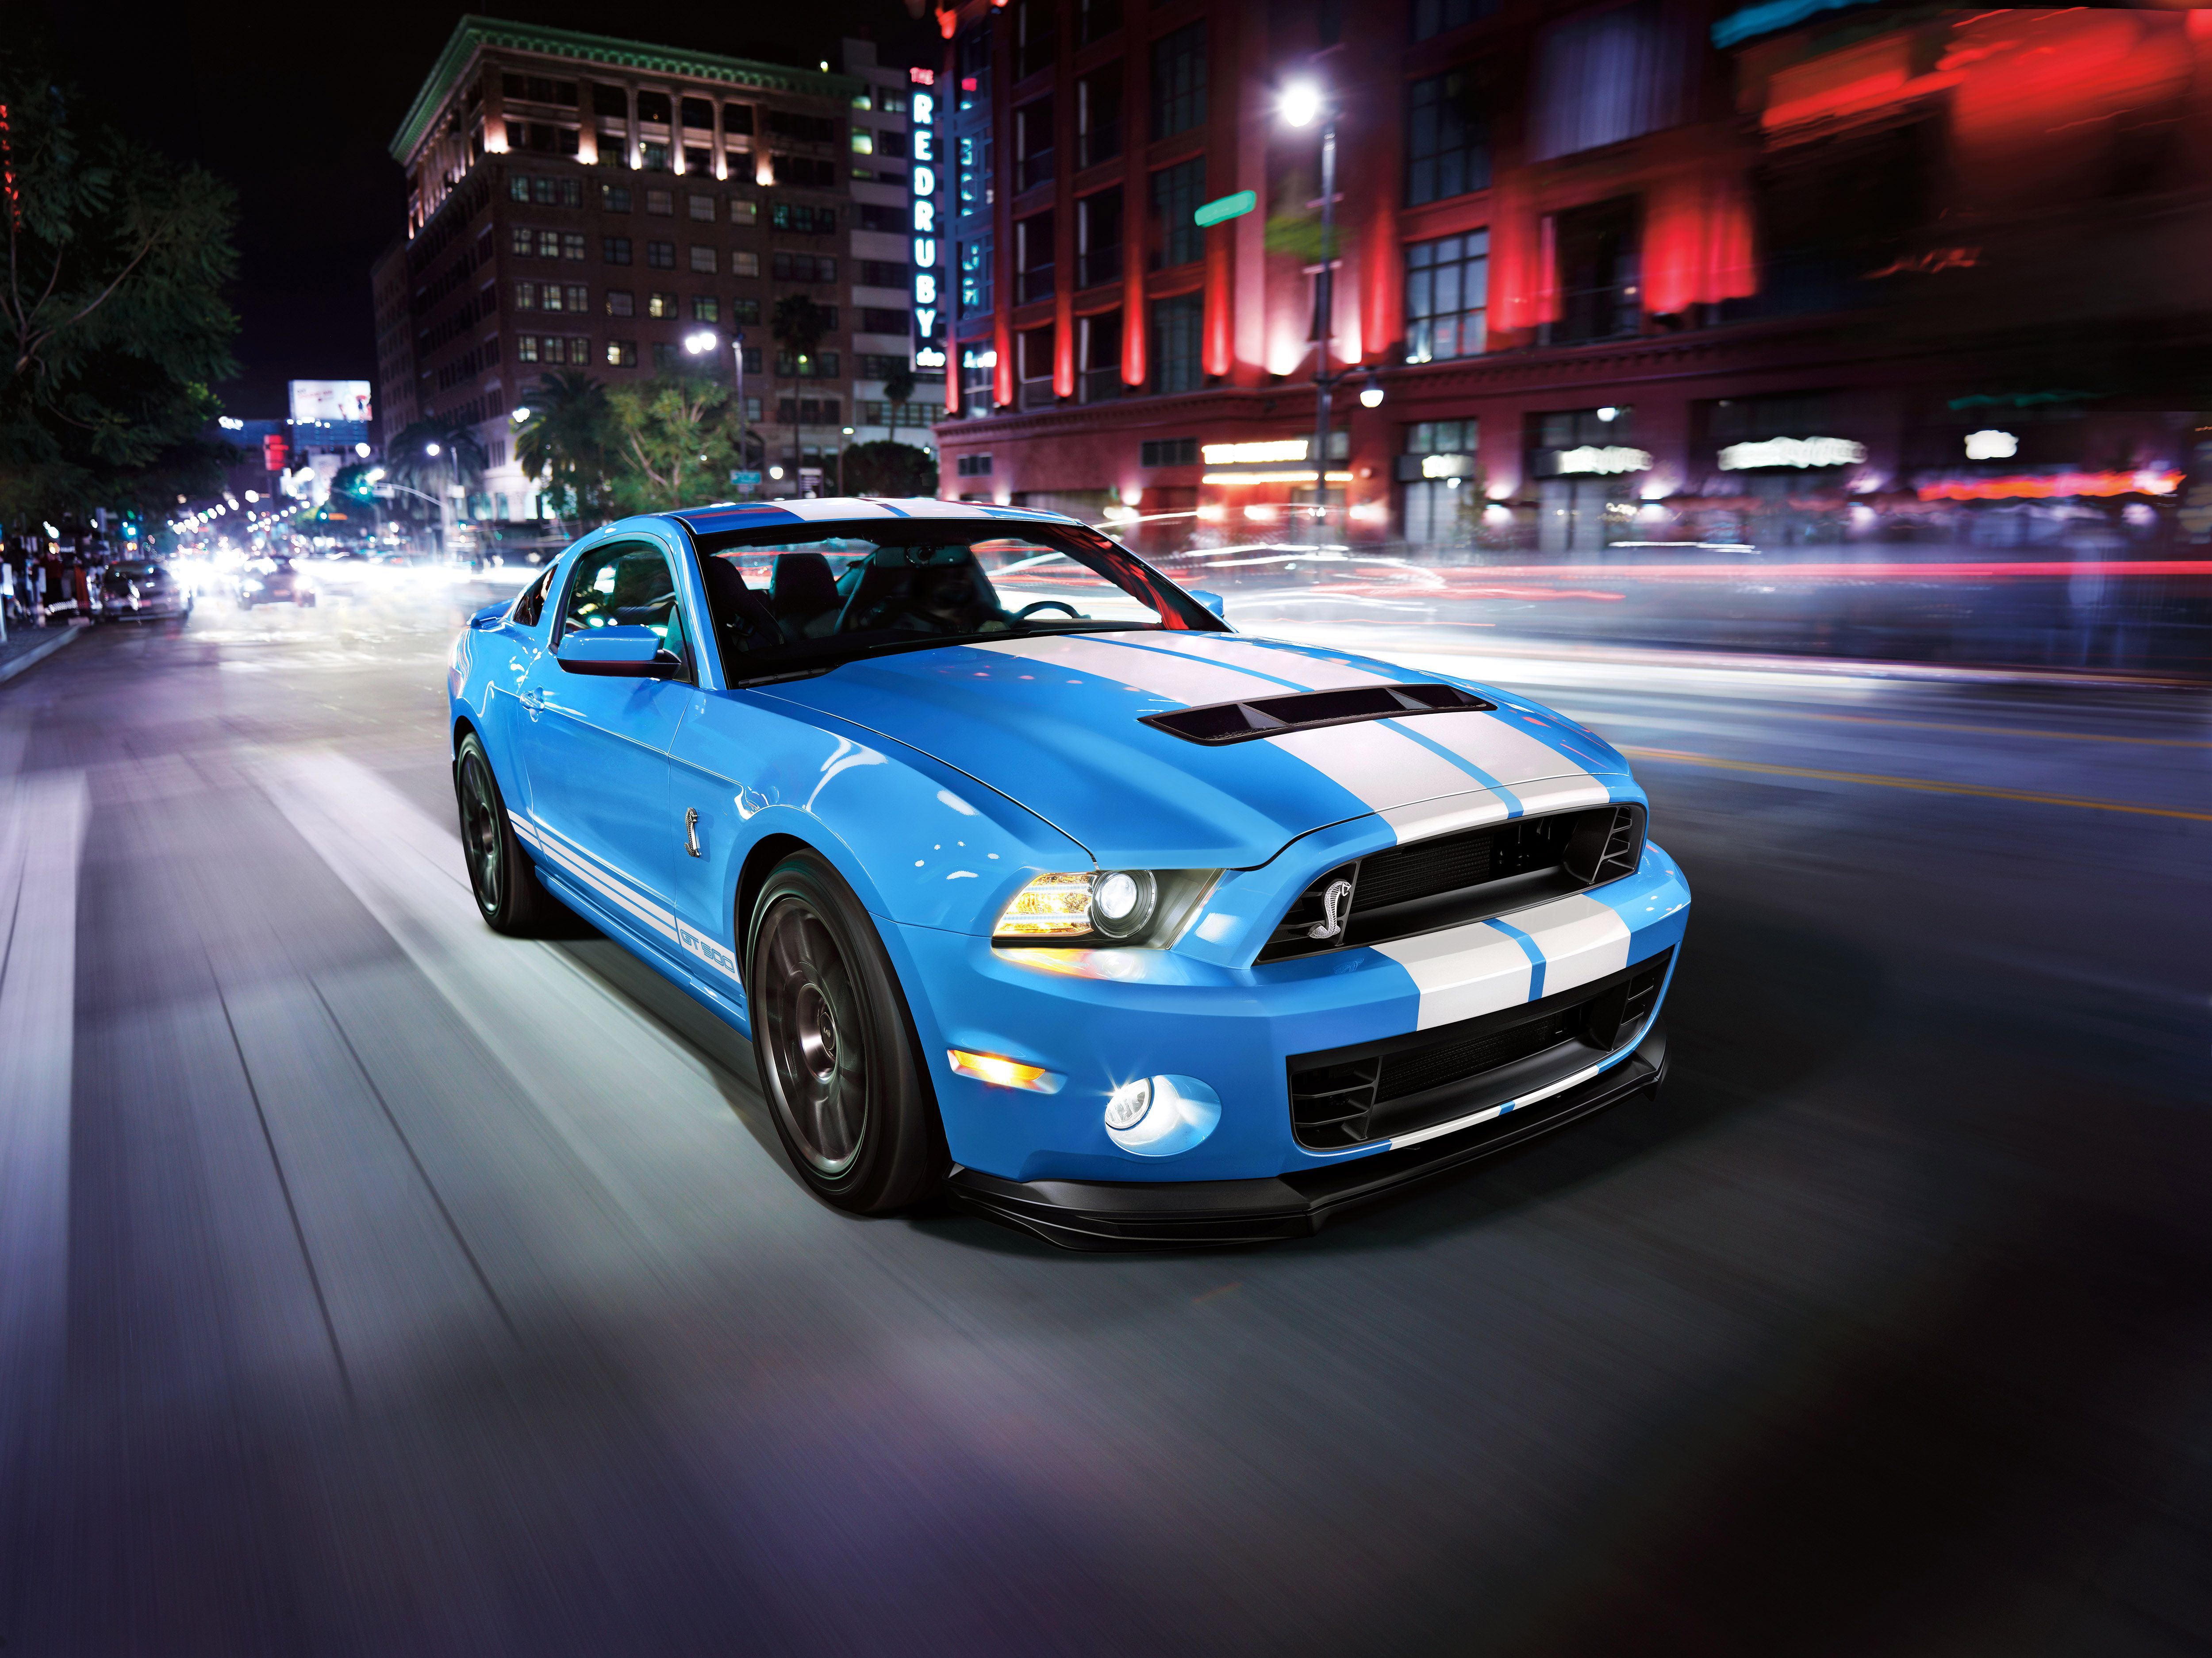 A blue Shelby GT500 on the street.